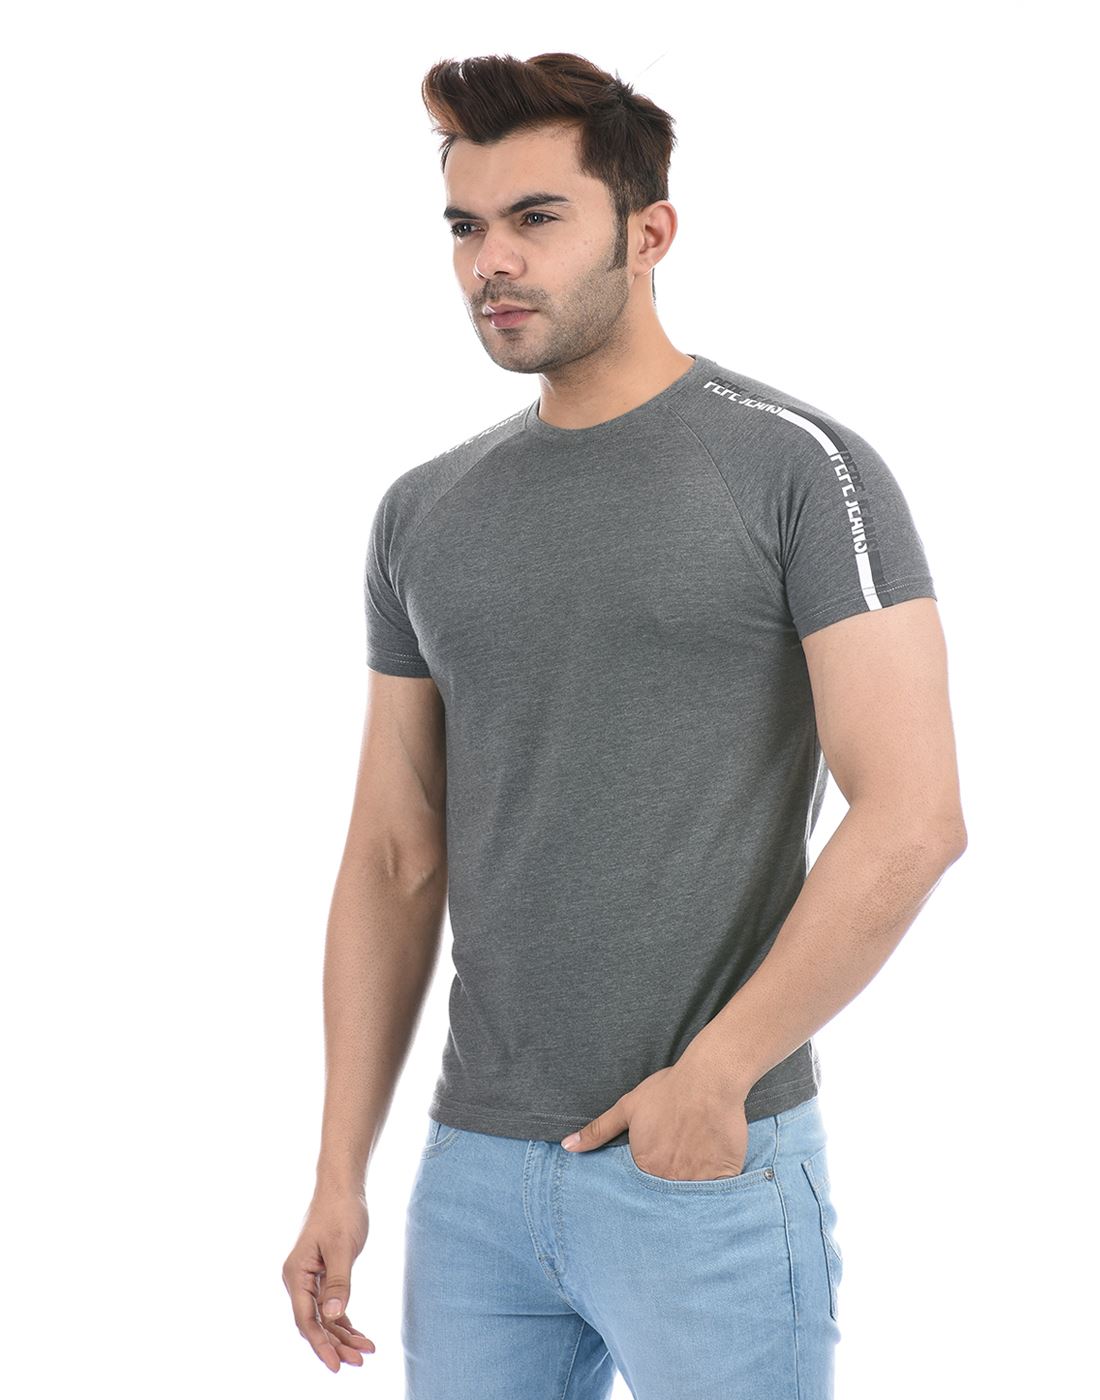 Pepe Wear Grey T-Shirt 144422 | Solid Jeans Grey Men Casual |